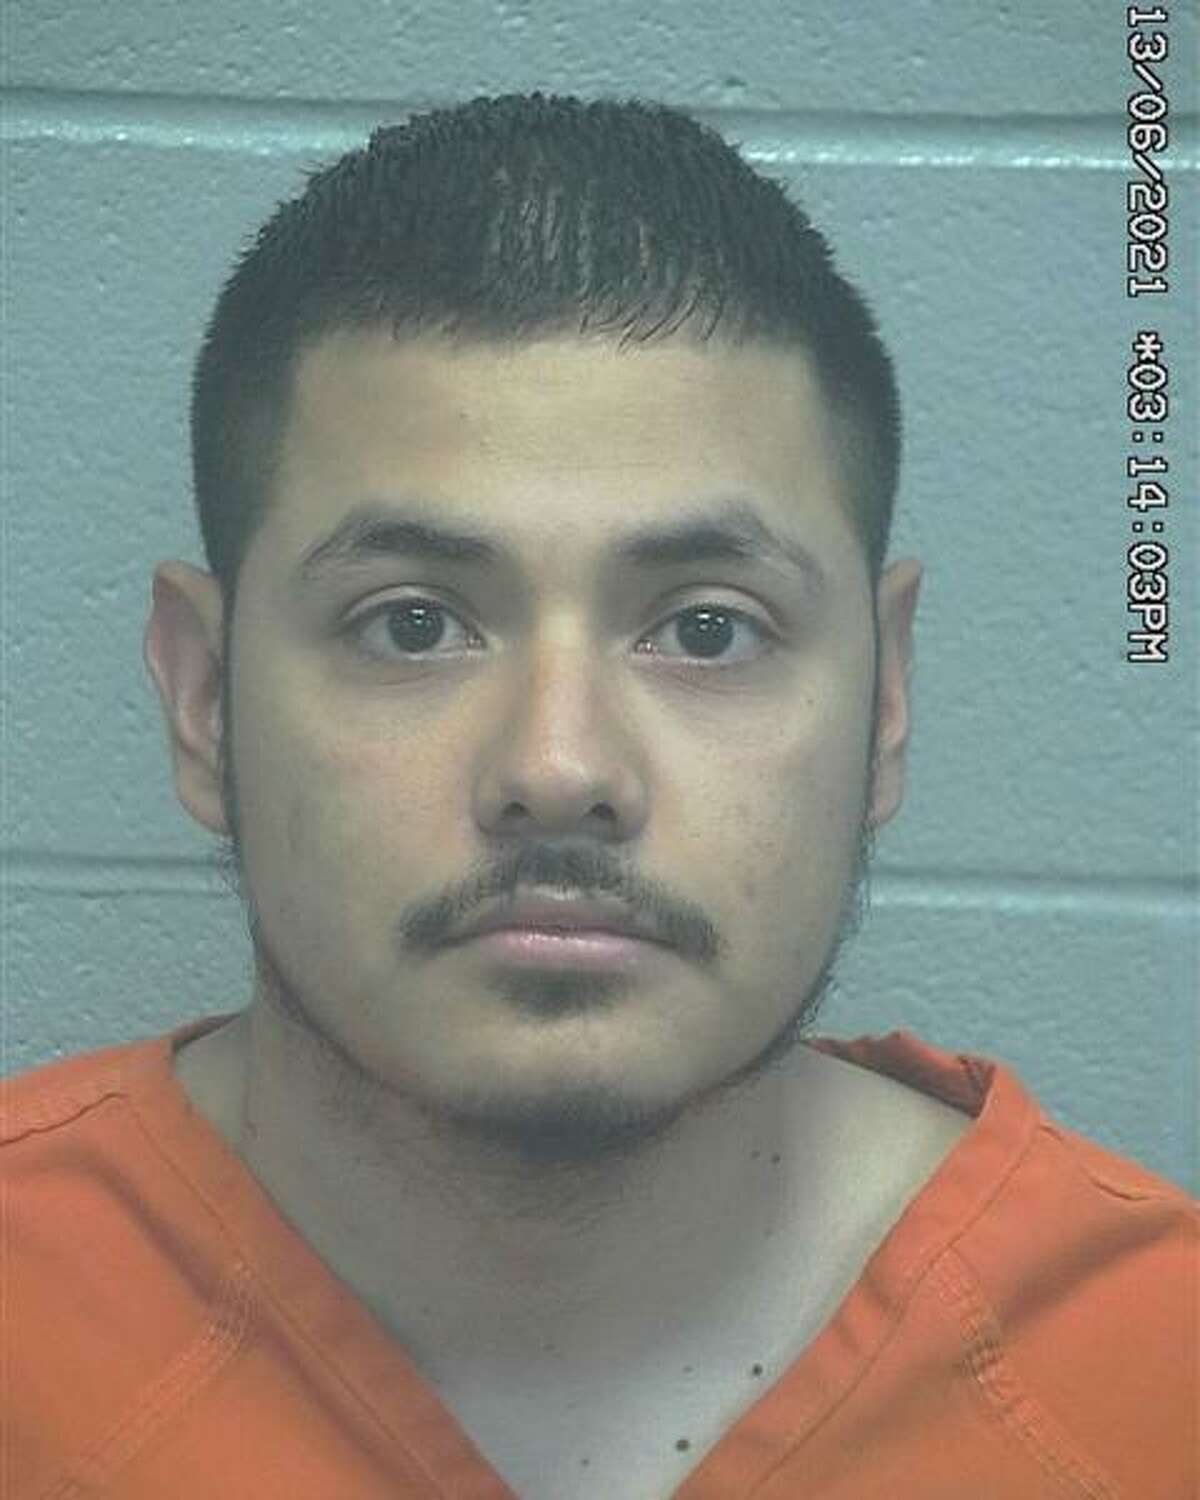 Christopher Gonzales was arrested and charged with murder of an unborn child and aggravated assault with a deadly weapon after allegedly running over a woman who was 8 months pregnant.